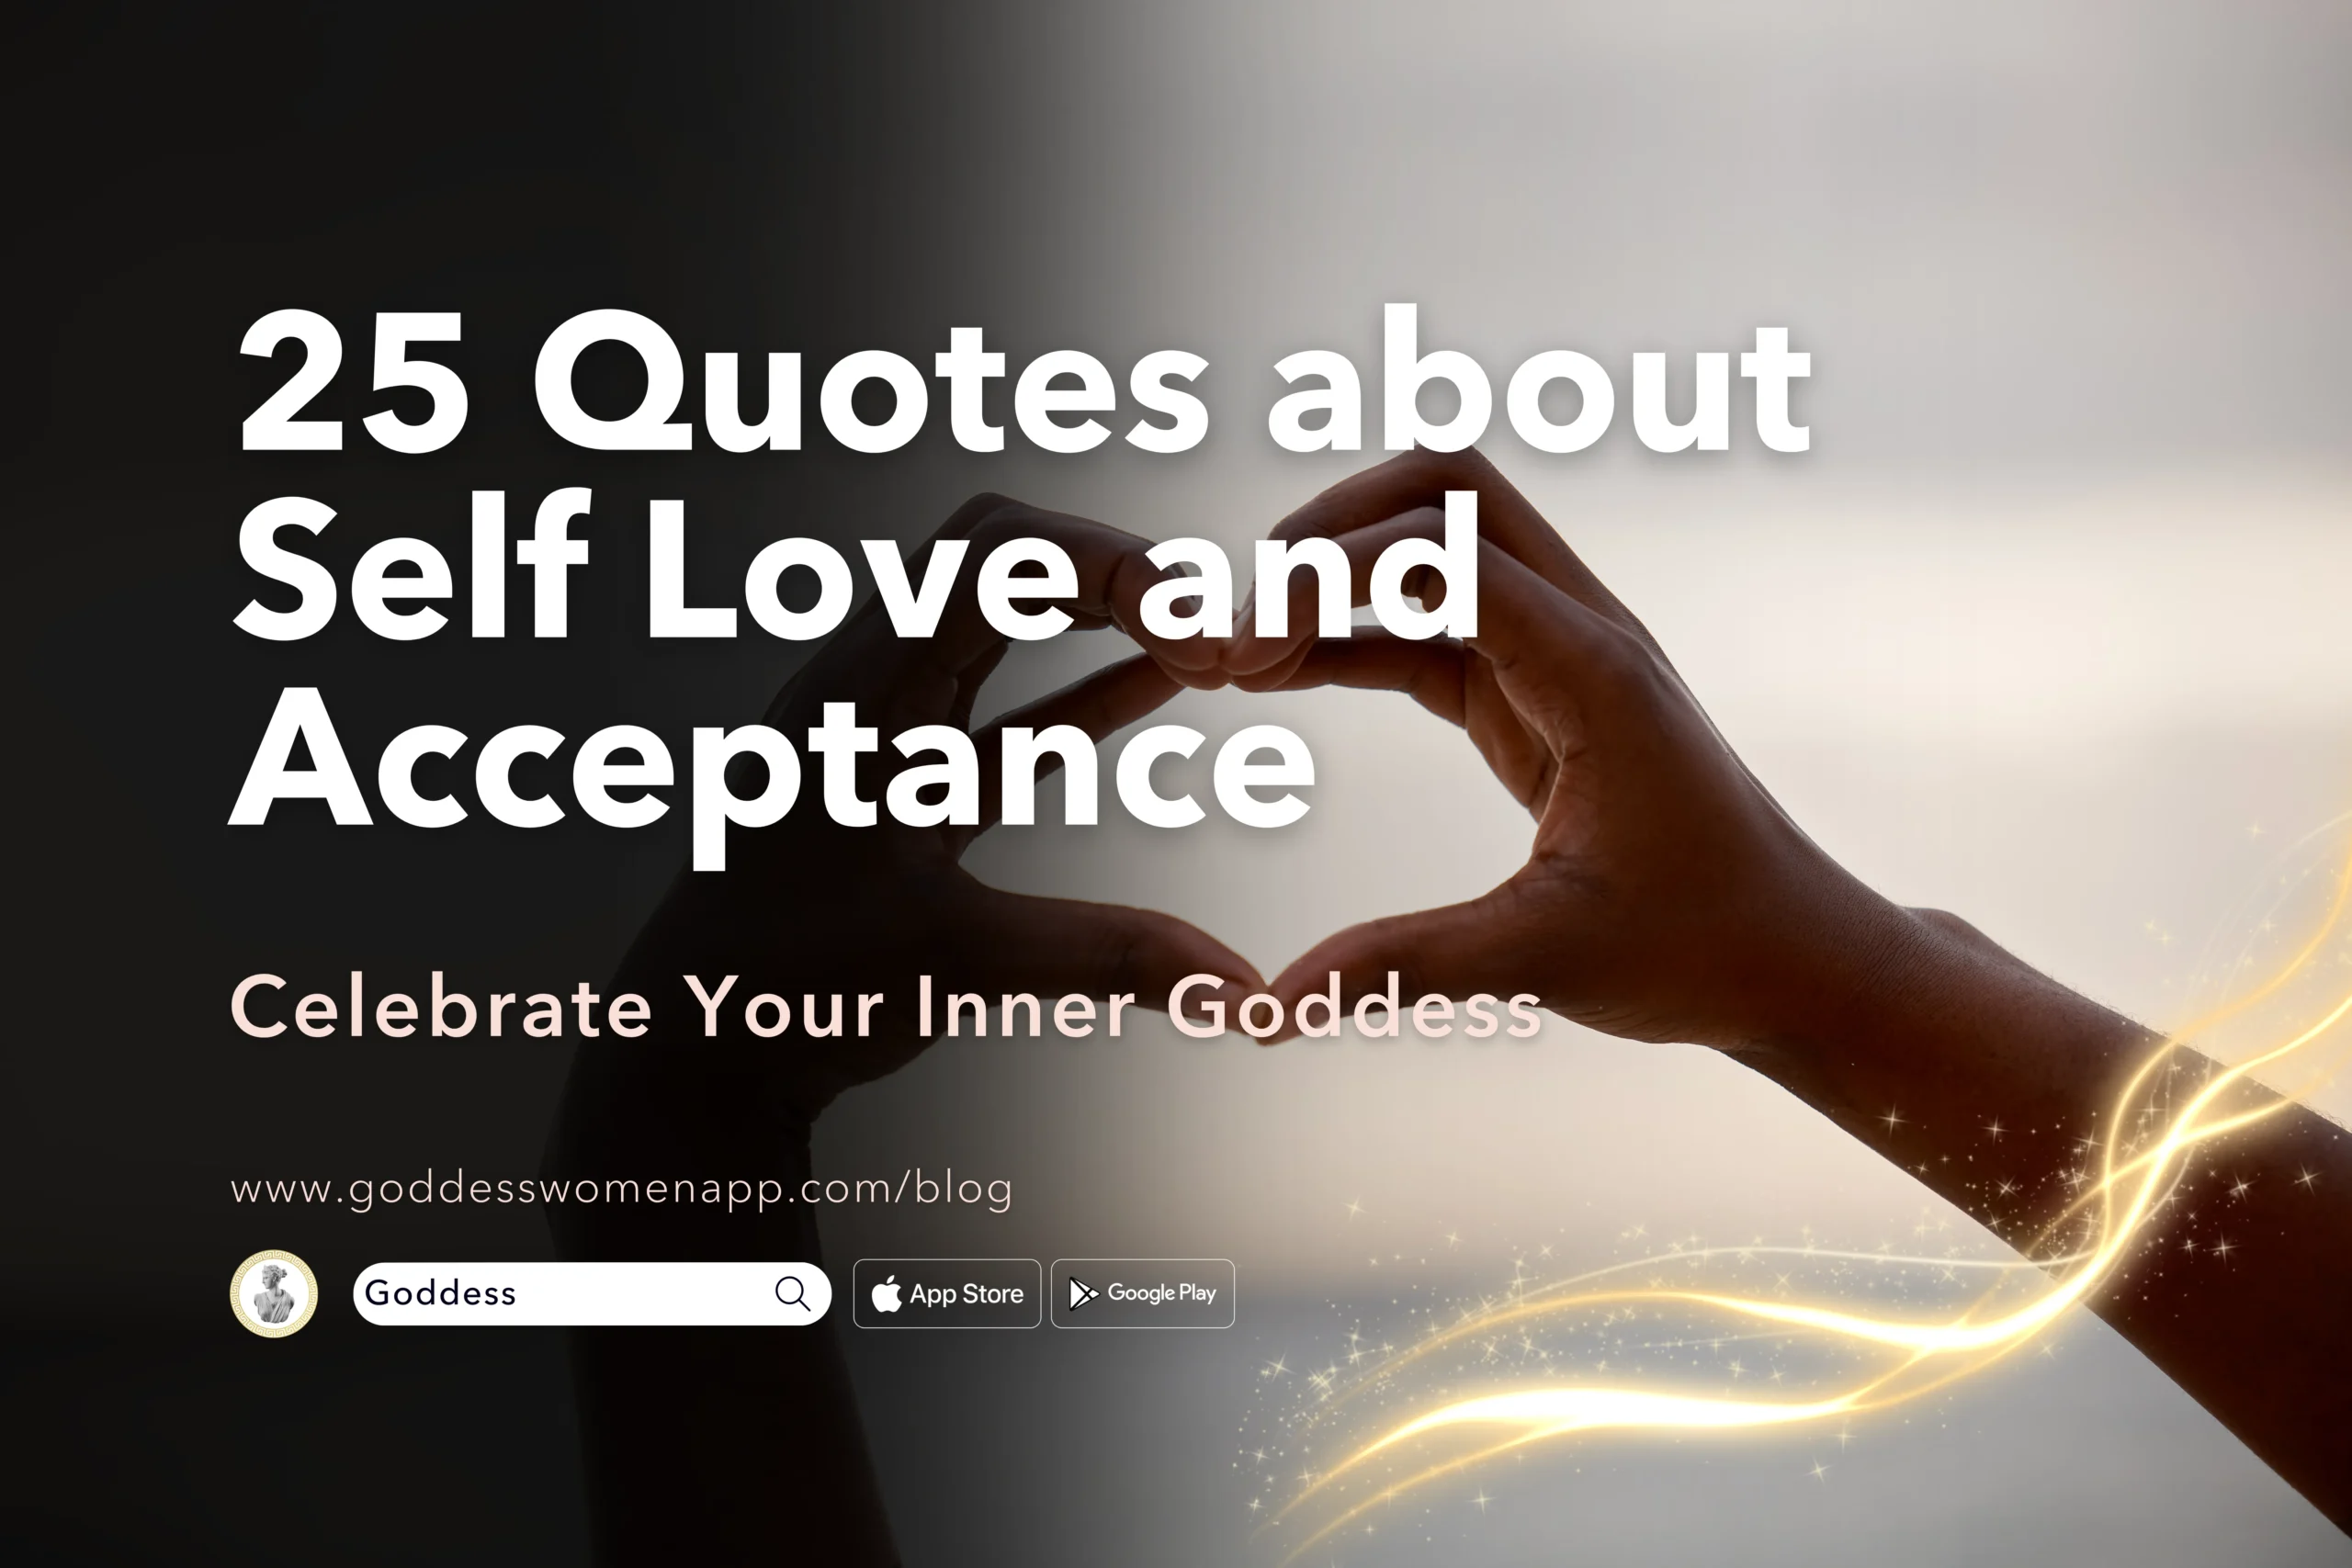 Celebrate Your Inner Goddess: 25 Quotes about Self Love and Acceptance